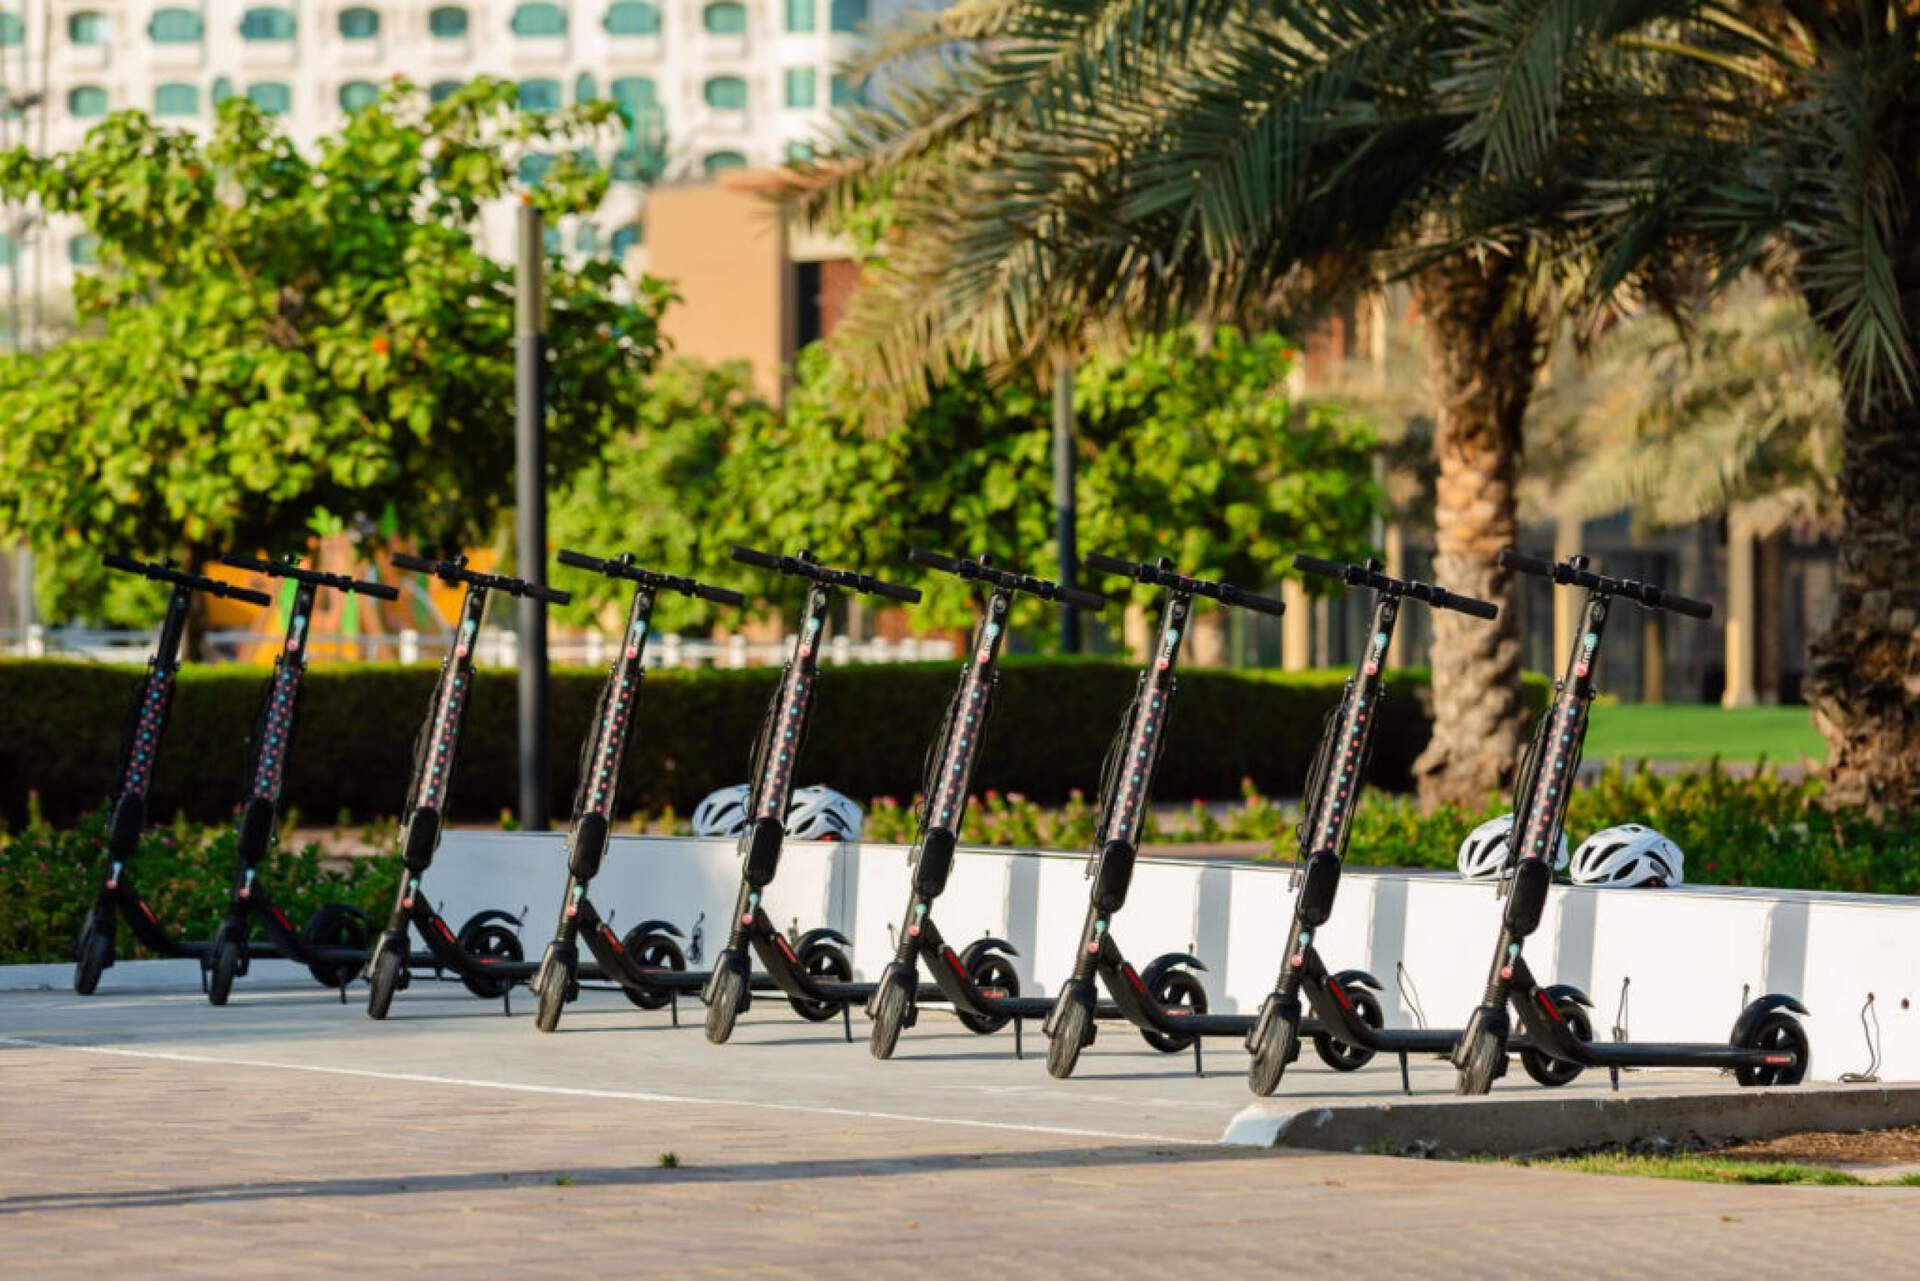 Several kick-scooters parked next to each other, surrounded by palm trees and bushy green leafed trees.